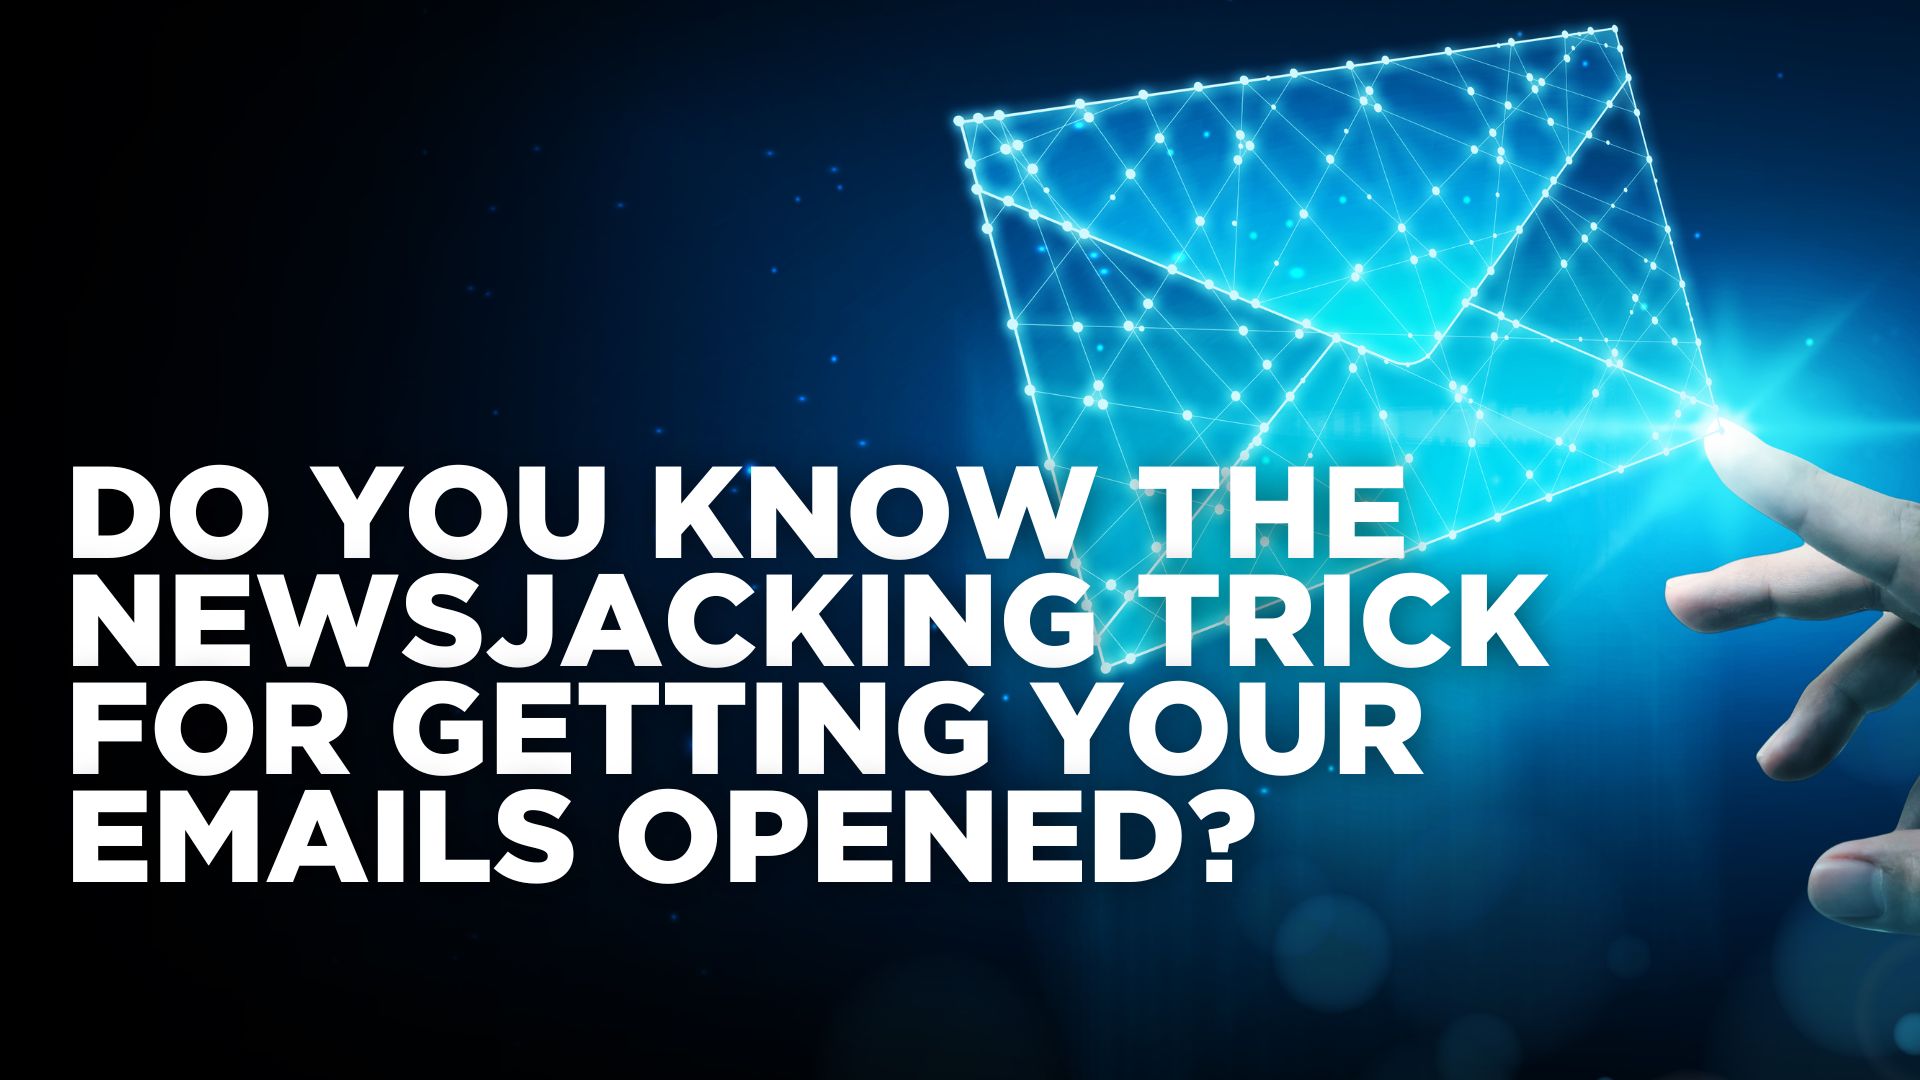 Do You Know the Newsjacking Trick for Getting Your Emails Opened